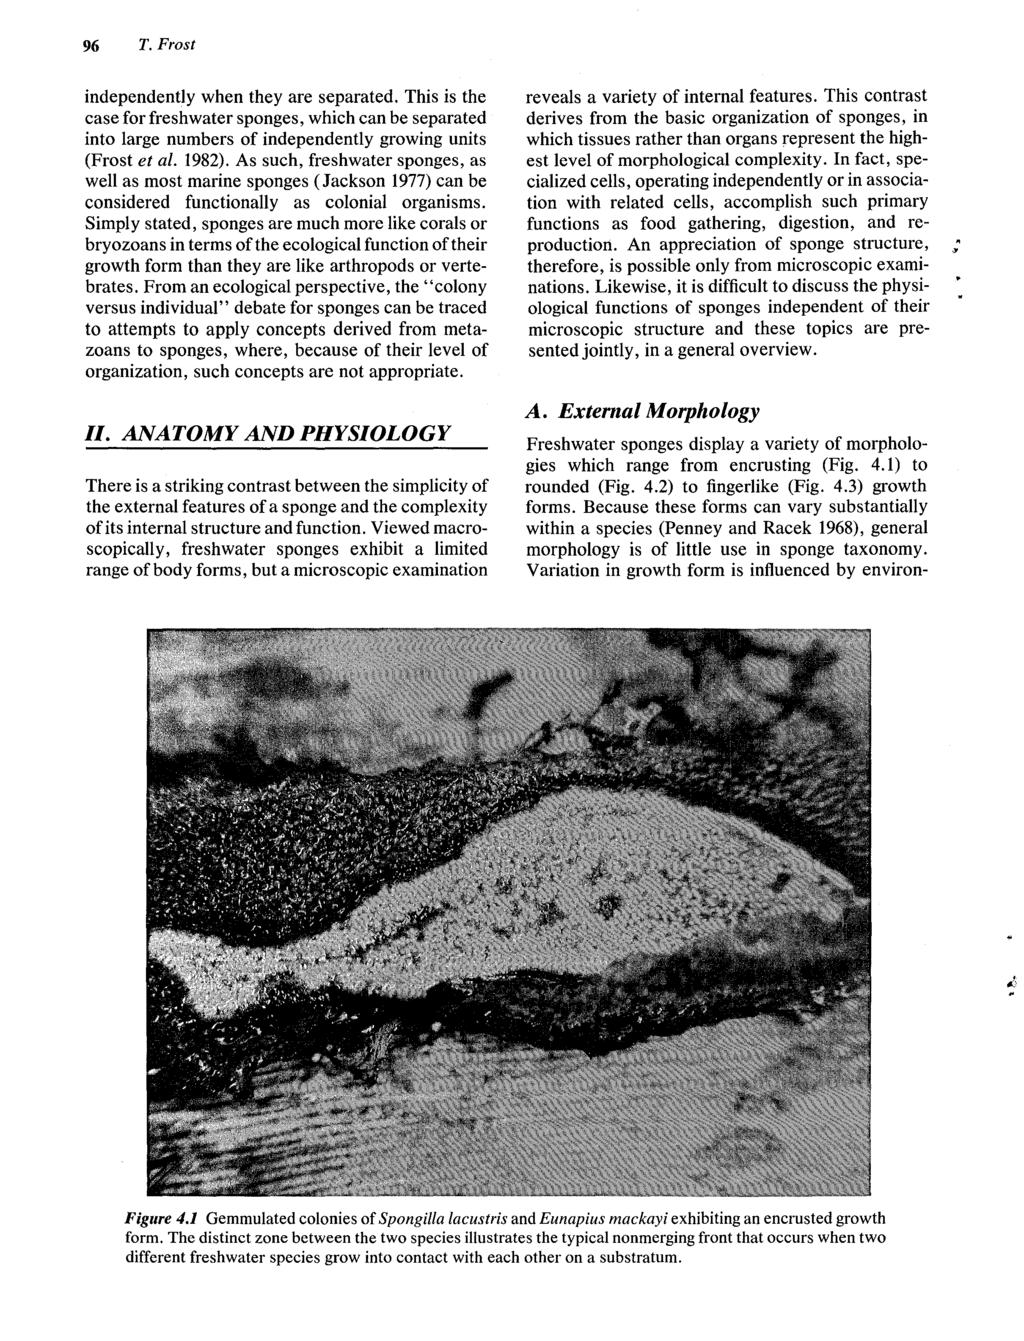 96 T. Frost independently when they are separated. This is the case for freshwater sponges, which can be separated into large numbers of independently growing units (Frost et al. 1982).